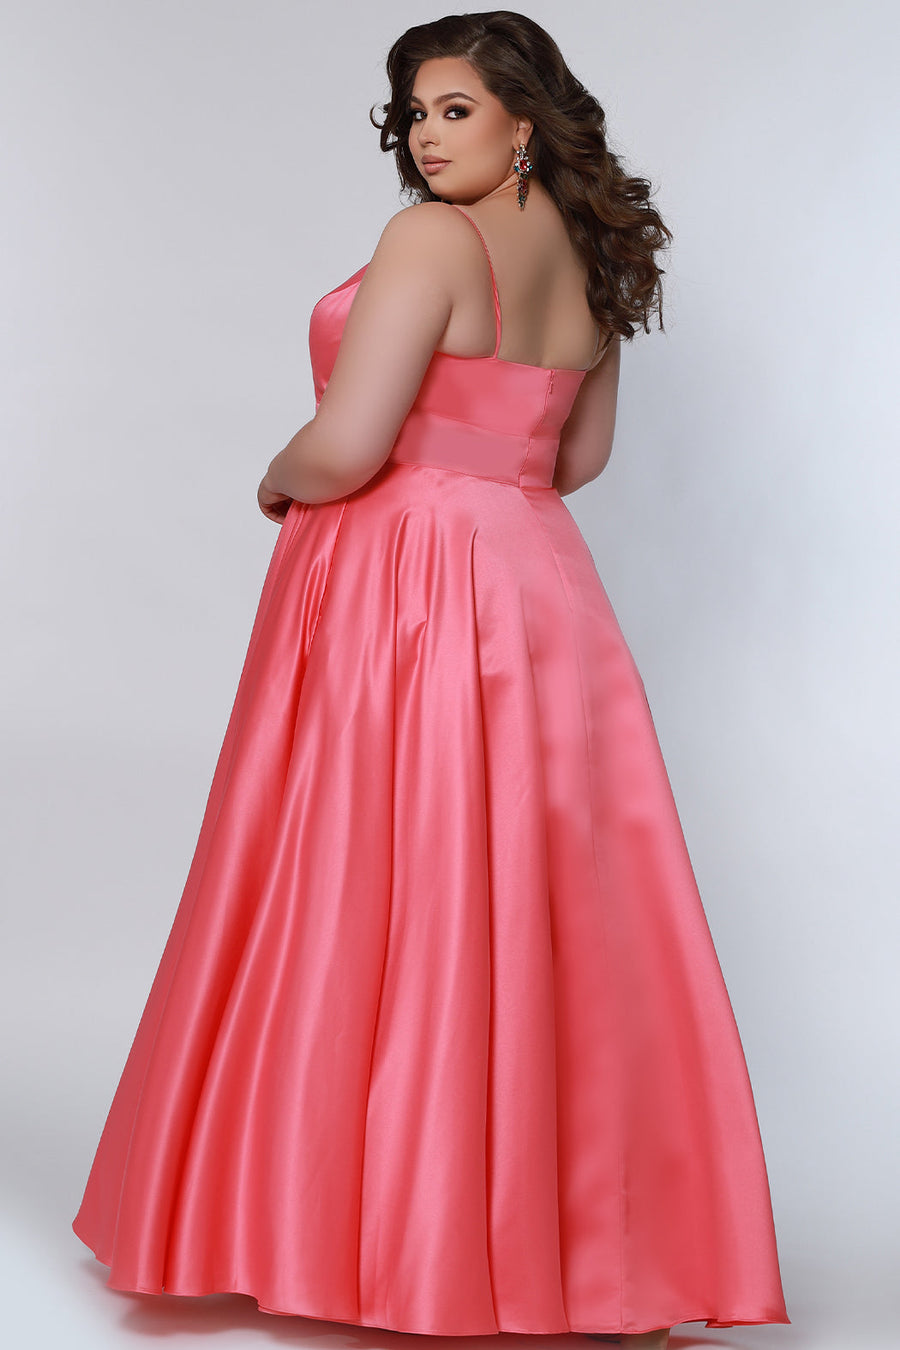 Tease Prom TE2209 Back view Plus size satin a-line dress in coral with spaghetti straps, a deep v-neckline and a slit.